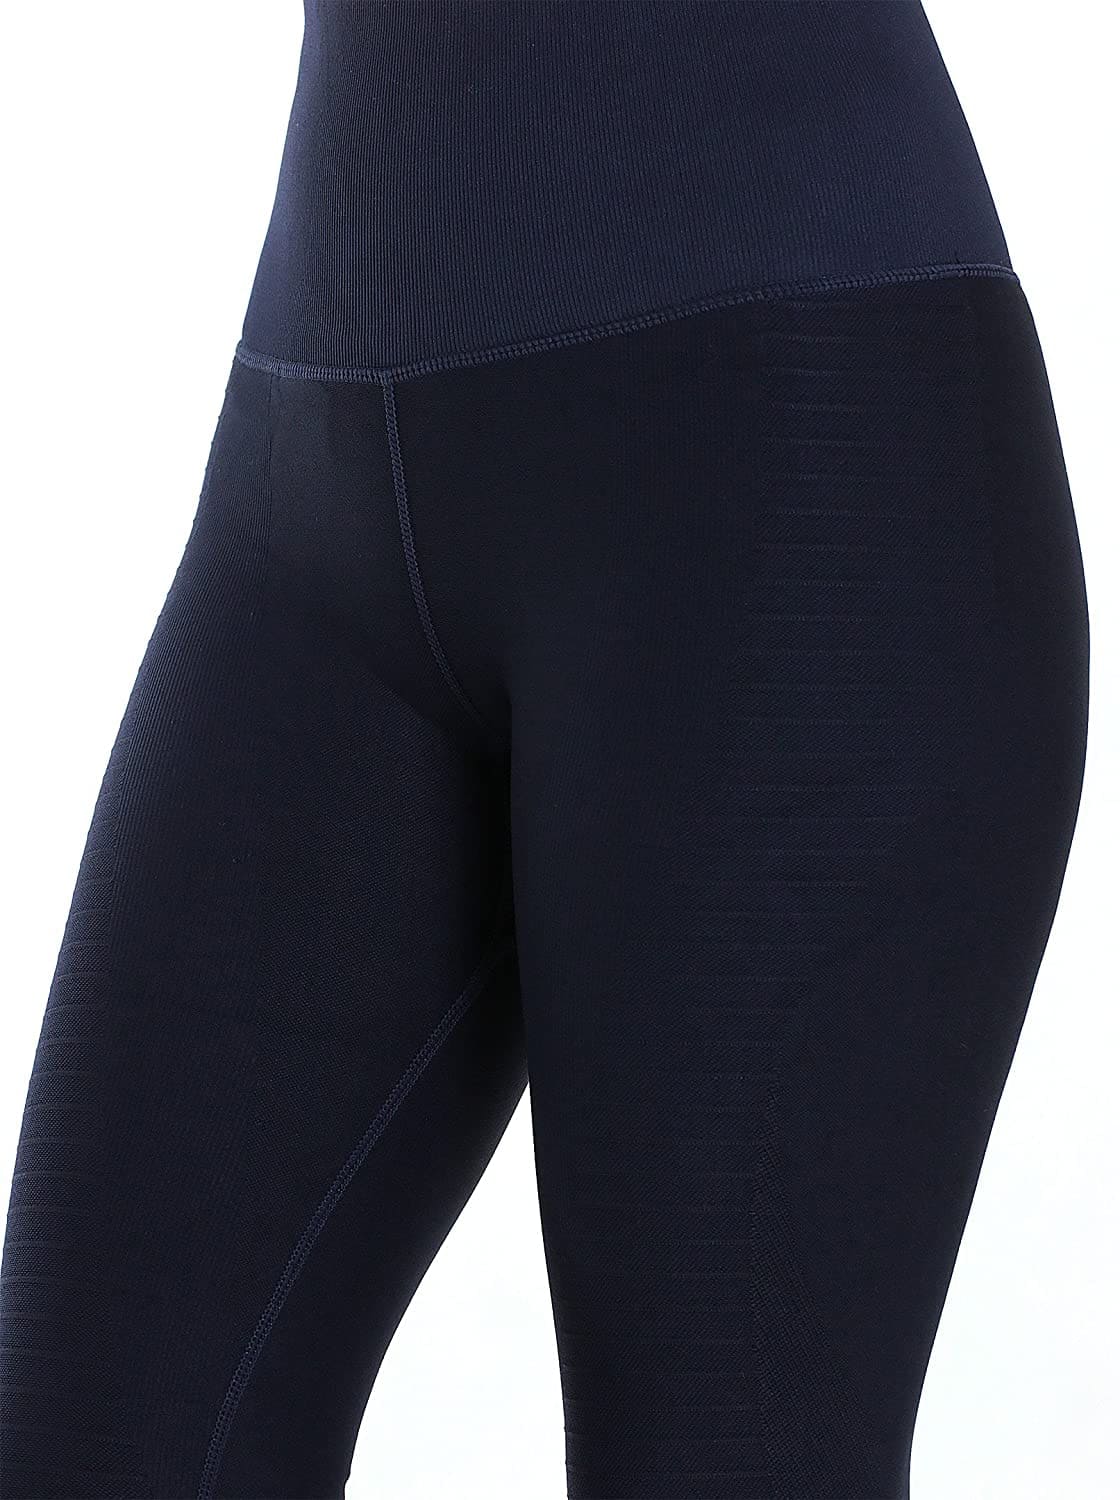 Great tummy control': These ultra-flattering leggings have just been  reduced to £13.59 on